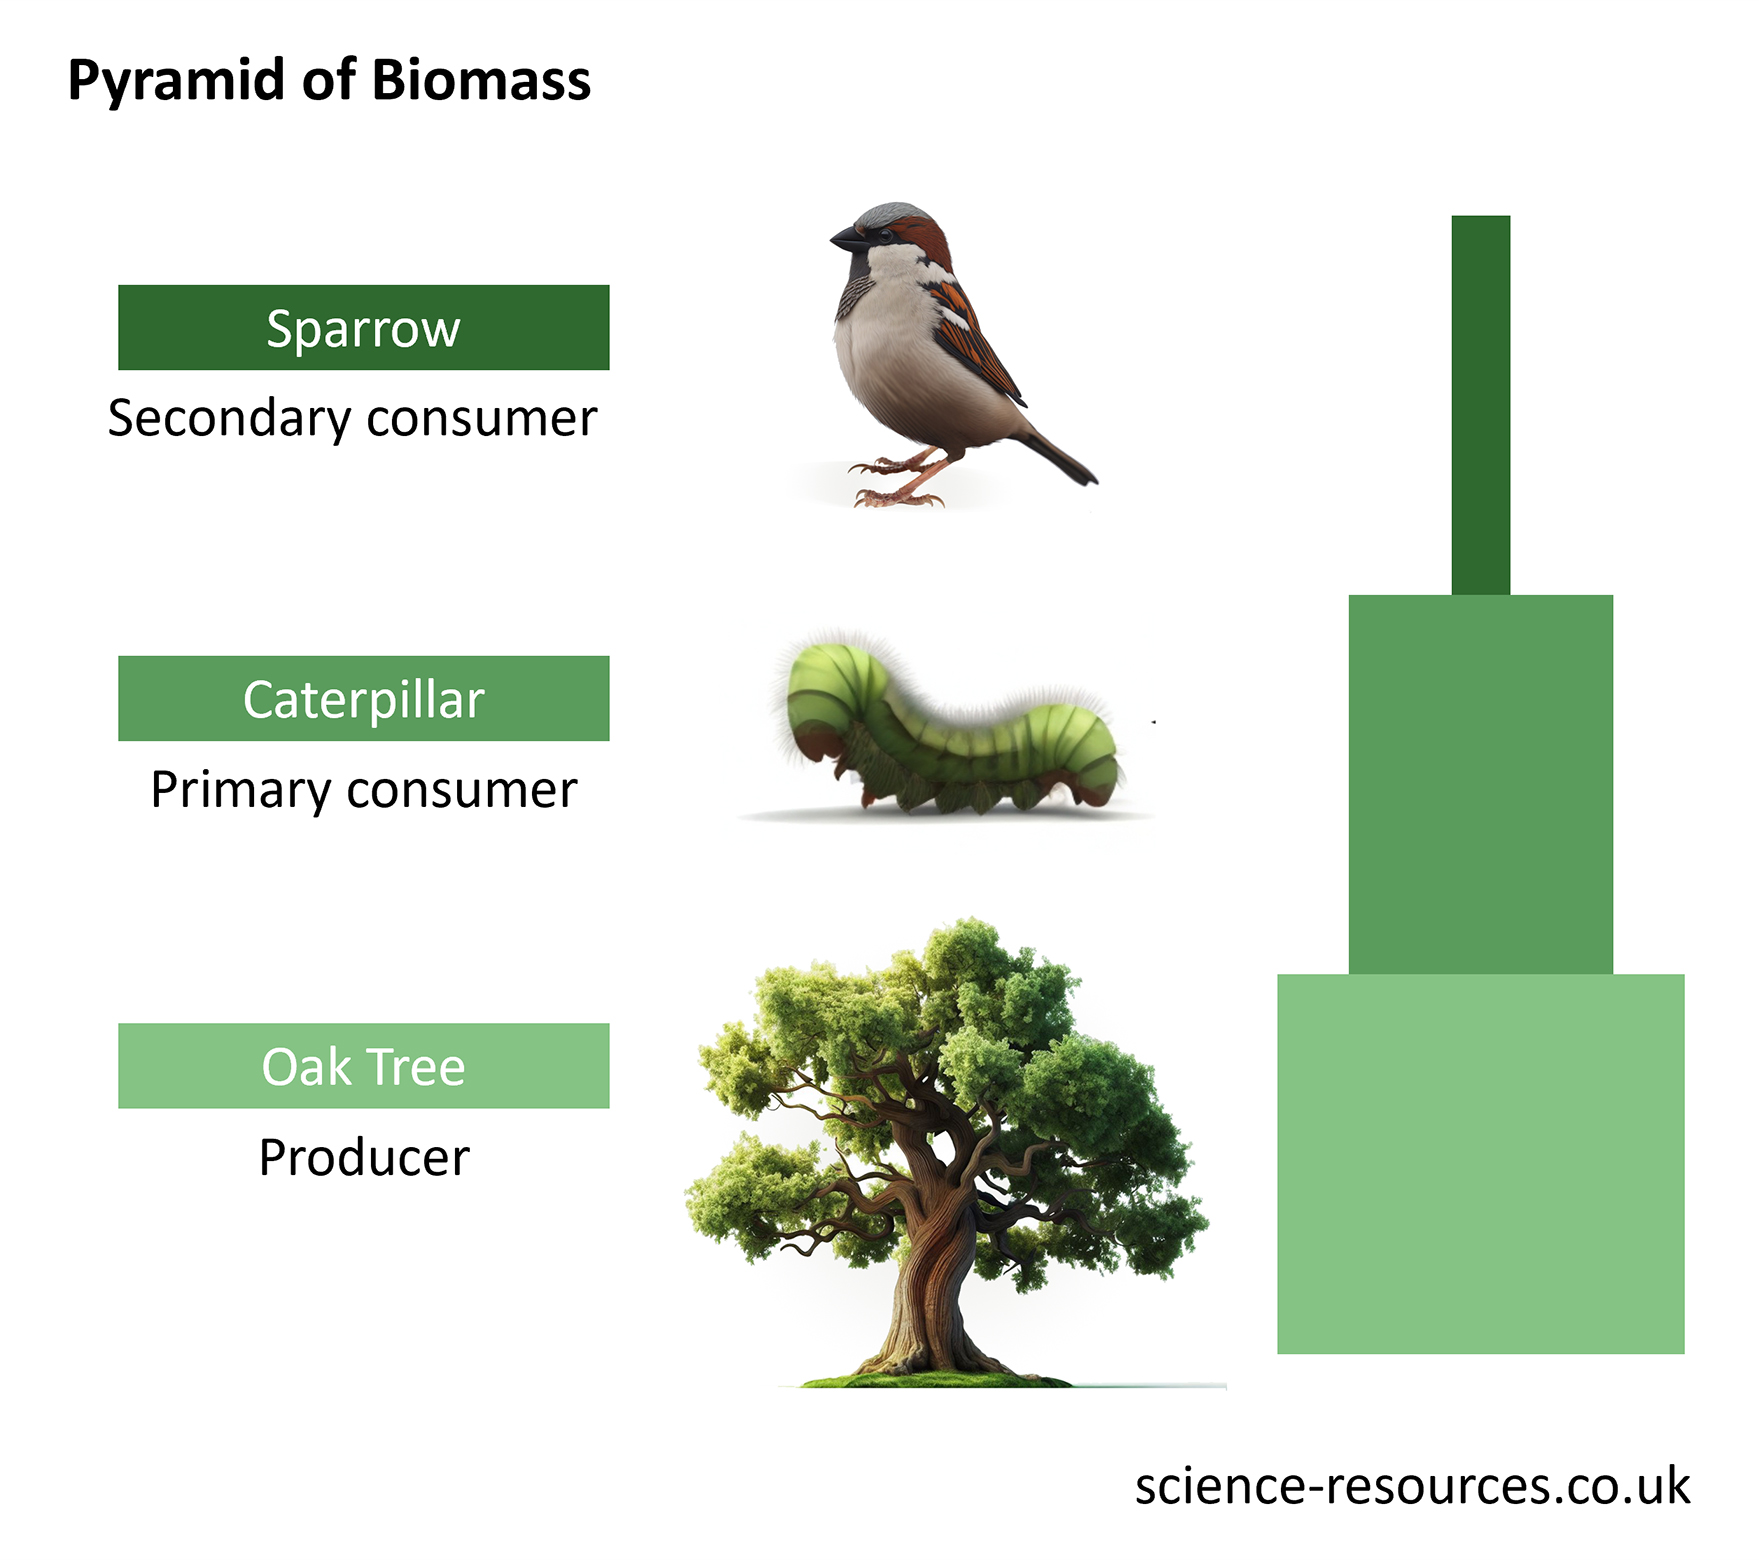 This image is a diagram representing a Pyramid of Biomass, illustrating the relationship between producers and consumers in an ecosystem. It shows an oak tree as the producer, a caterpillar as the primary consumer, and a sparrow as the secondary consumer. 